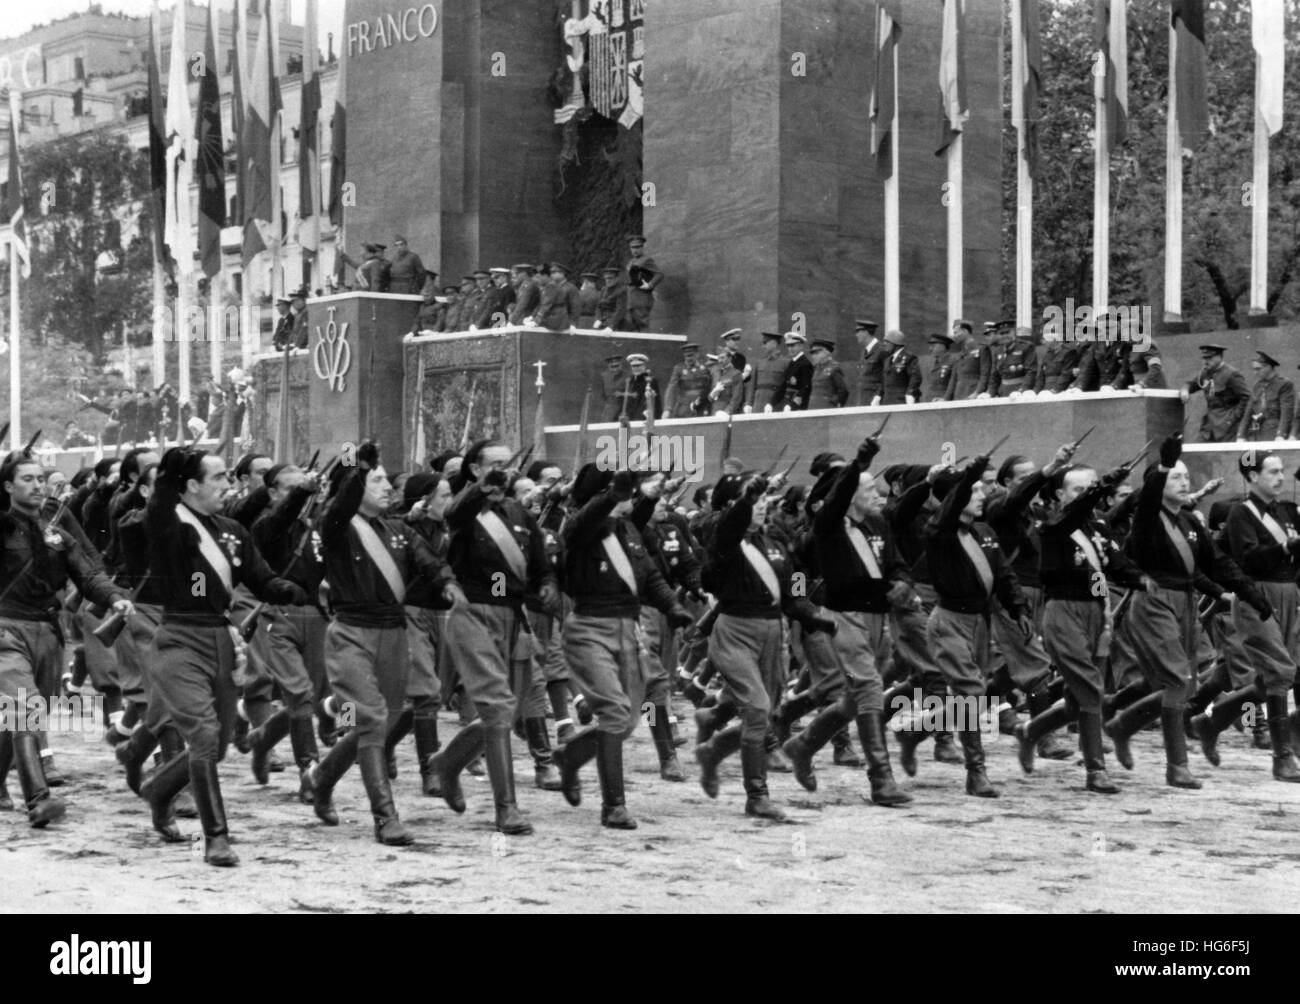 The Nazi propaganda picture shows the march of fascist militia from Italy (commonly called 'Blackshirts') on the occasion of the large victory parade after Franco's seizure of power in Madrid, Spain, May 1939. Fotoarchiv für Zeitgeschichtee- NO WIRE SERVICE - | usage worldwide Stock Photo